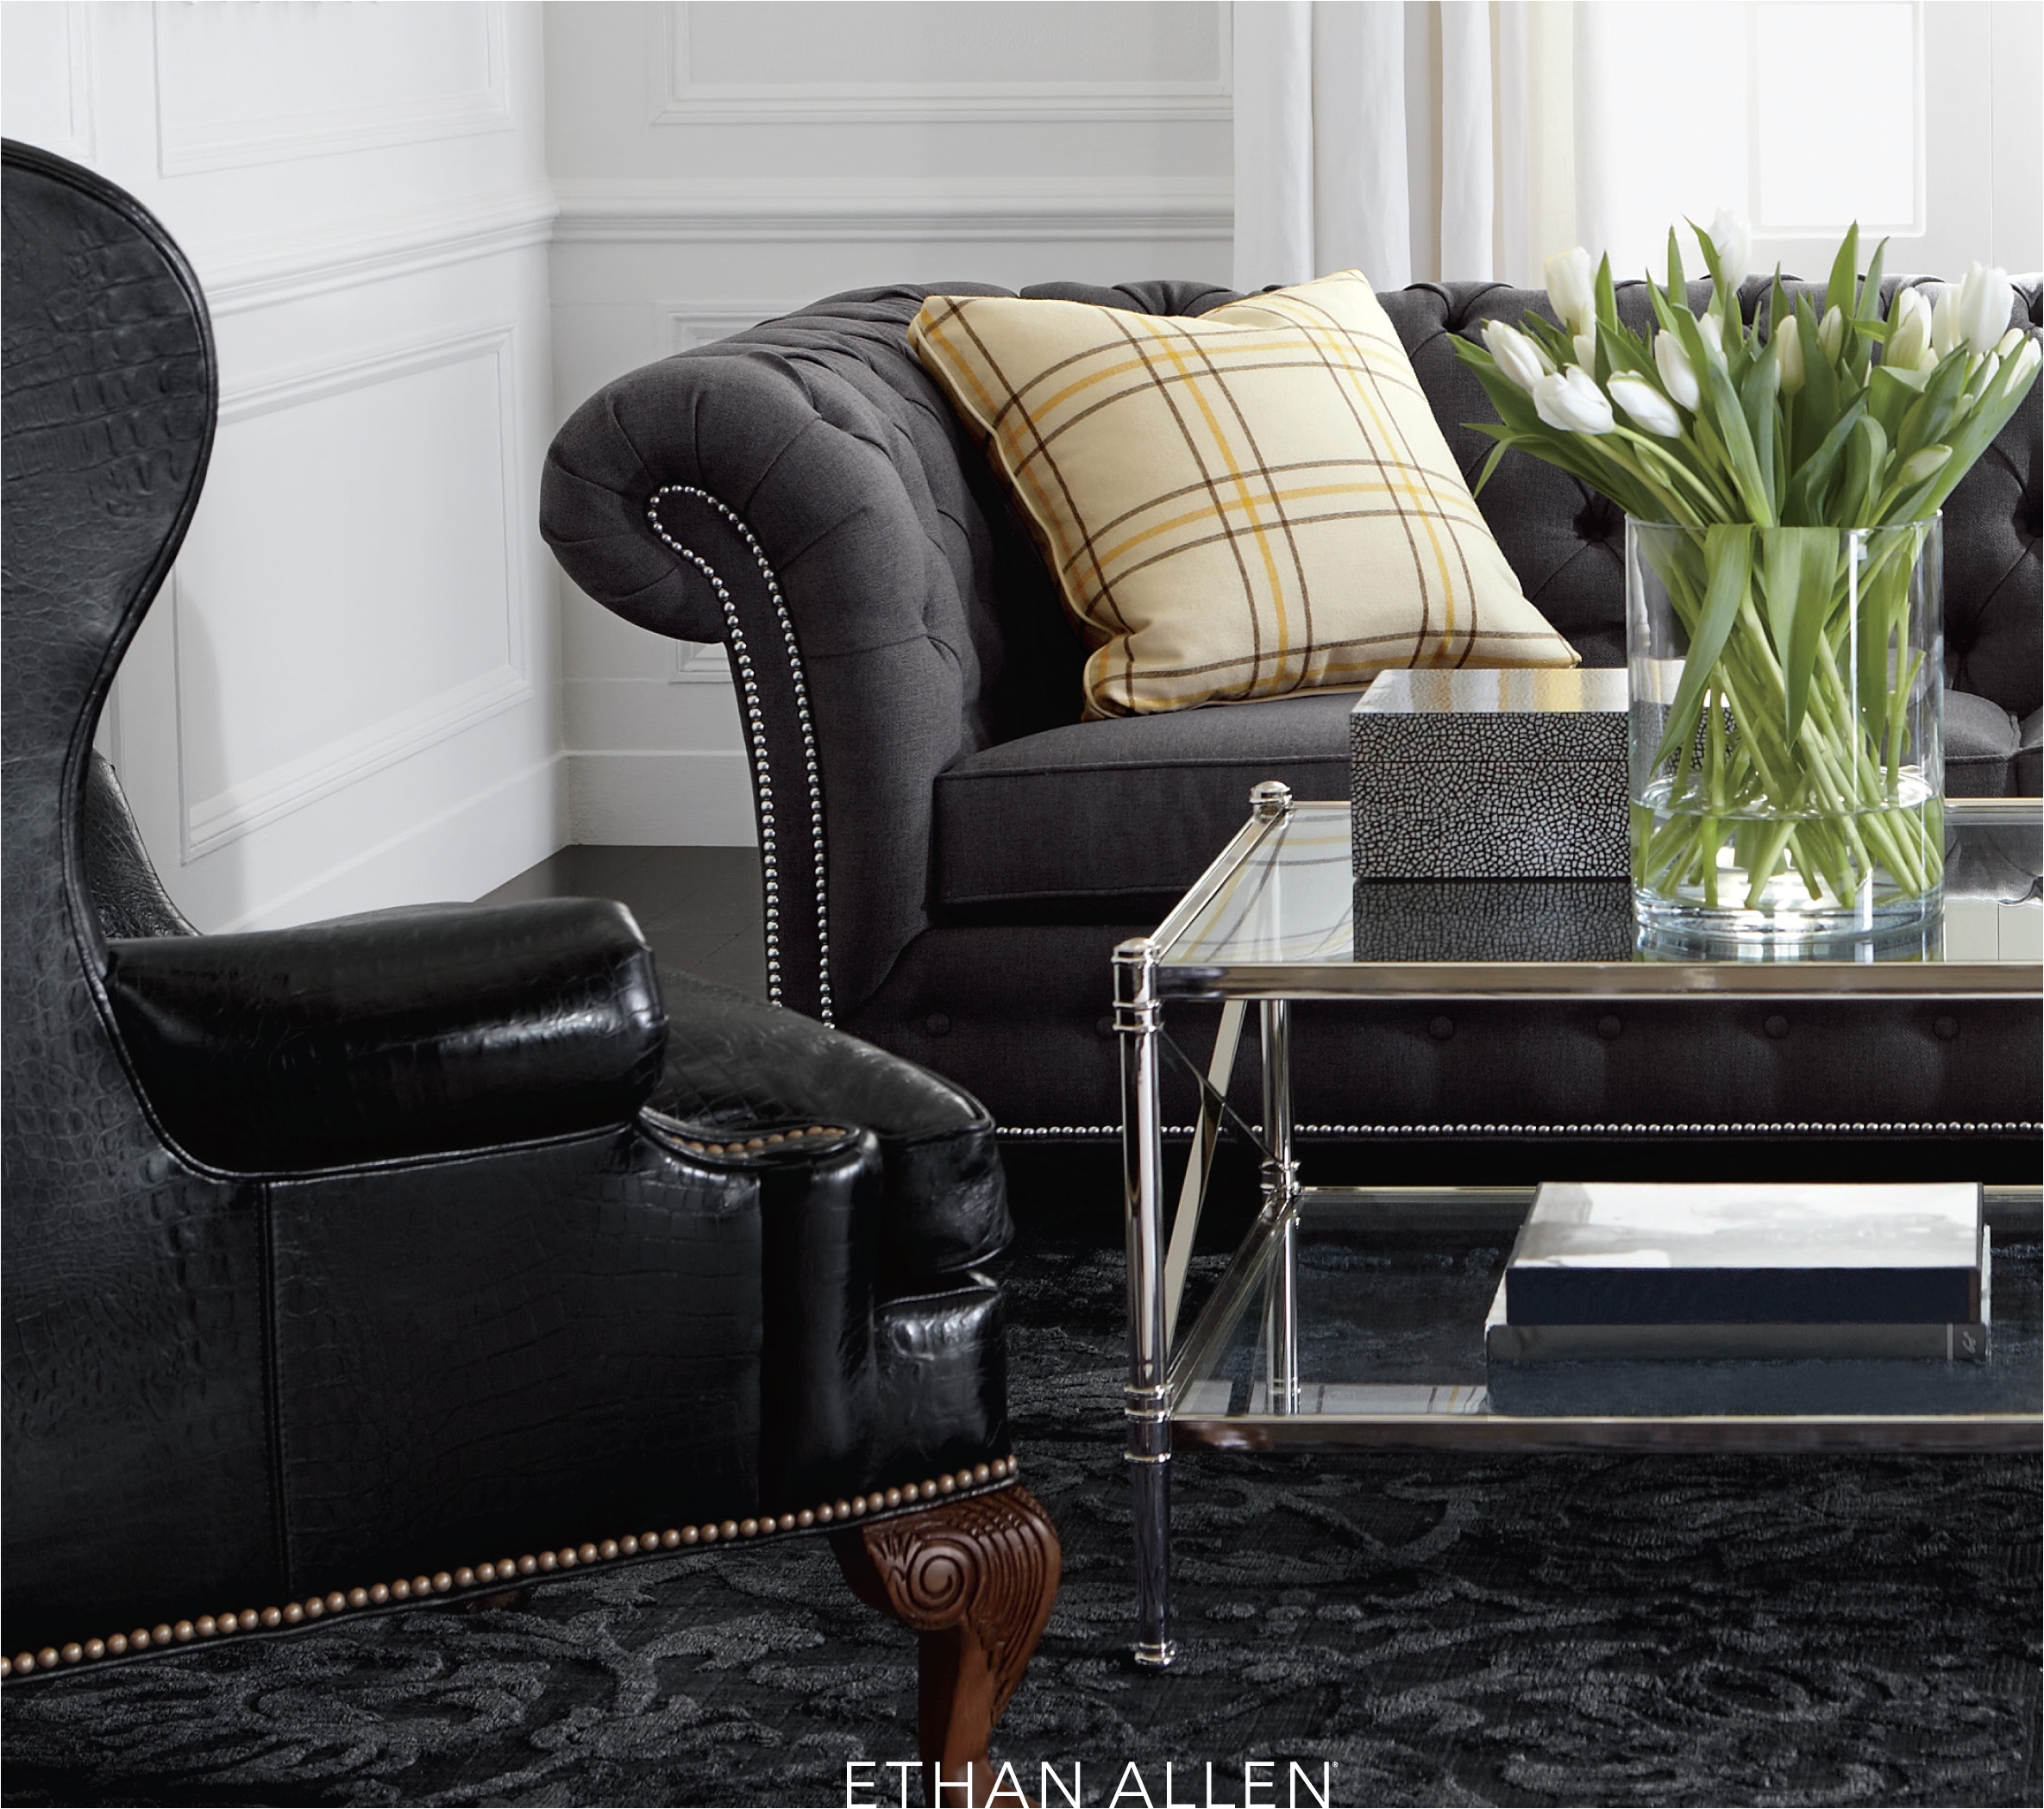 ethan allen and amazon launch collaboration